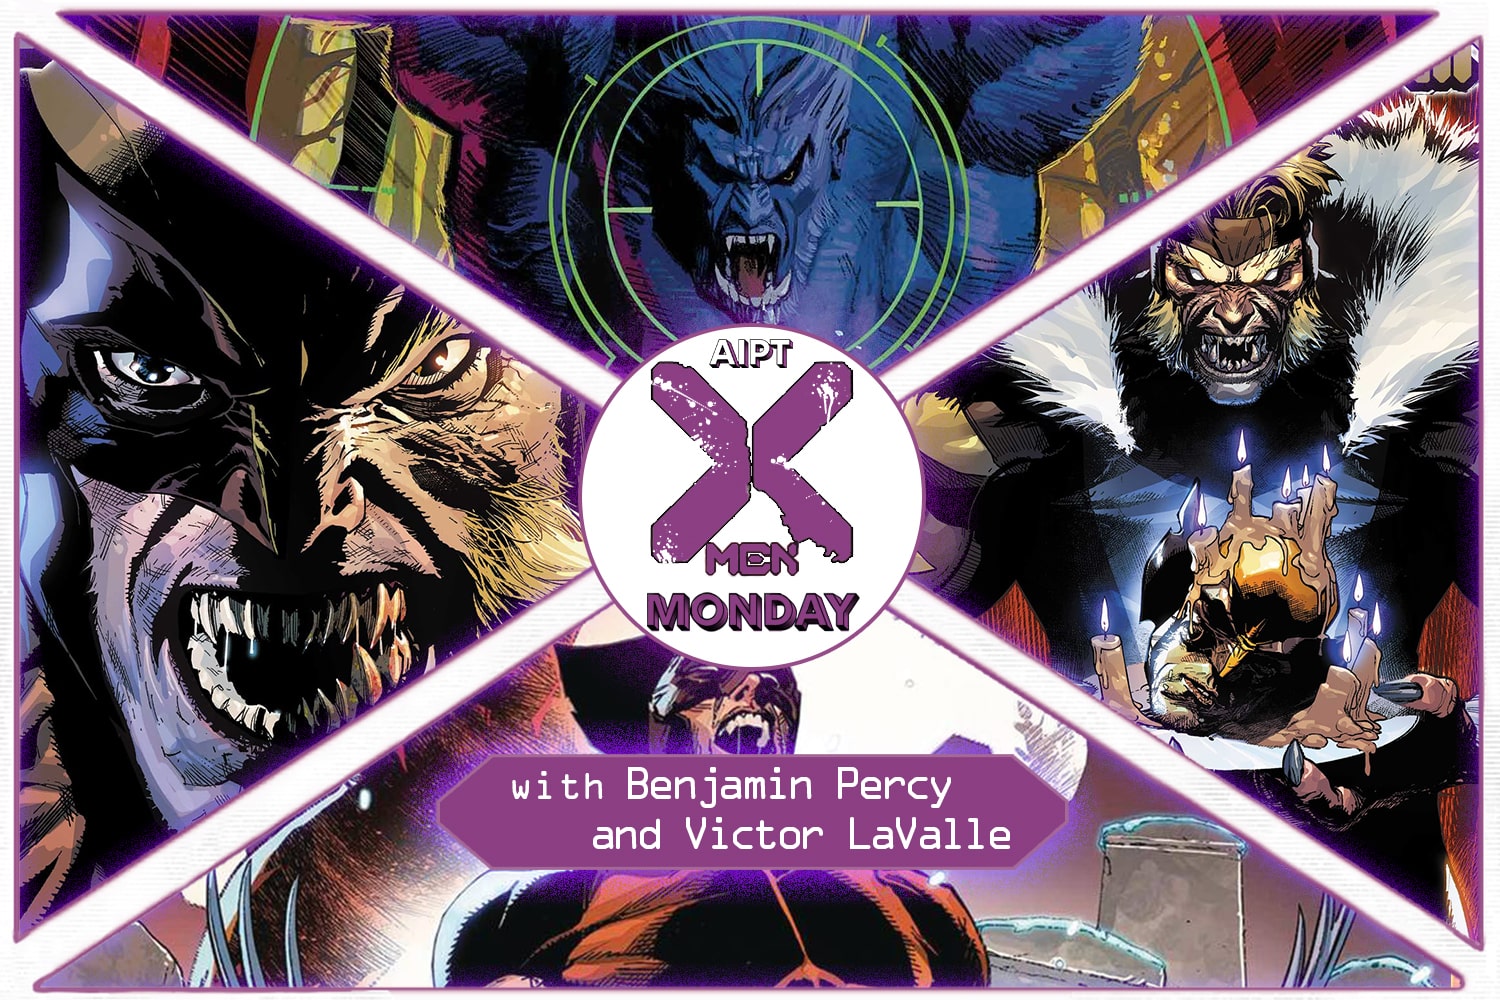 X-Men Monday #230 - Benjamin Percy and Victor LaValle Talk 'Wolverine', 'Sabretooth War', and 'X-Force'